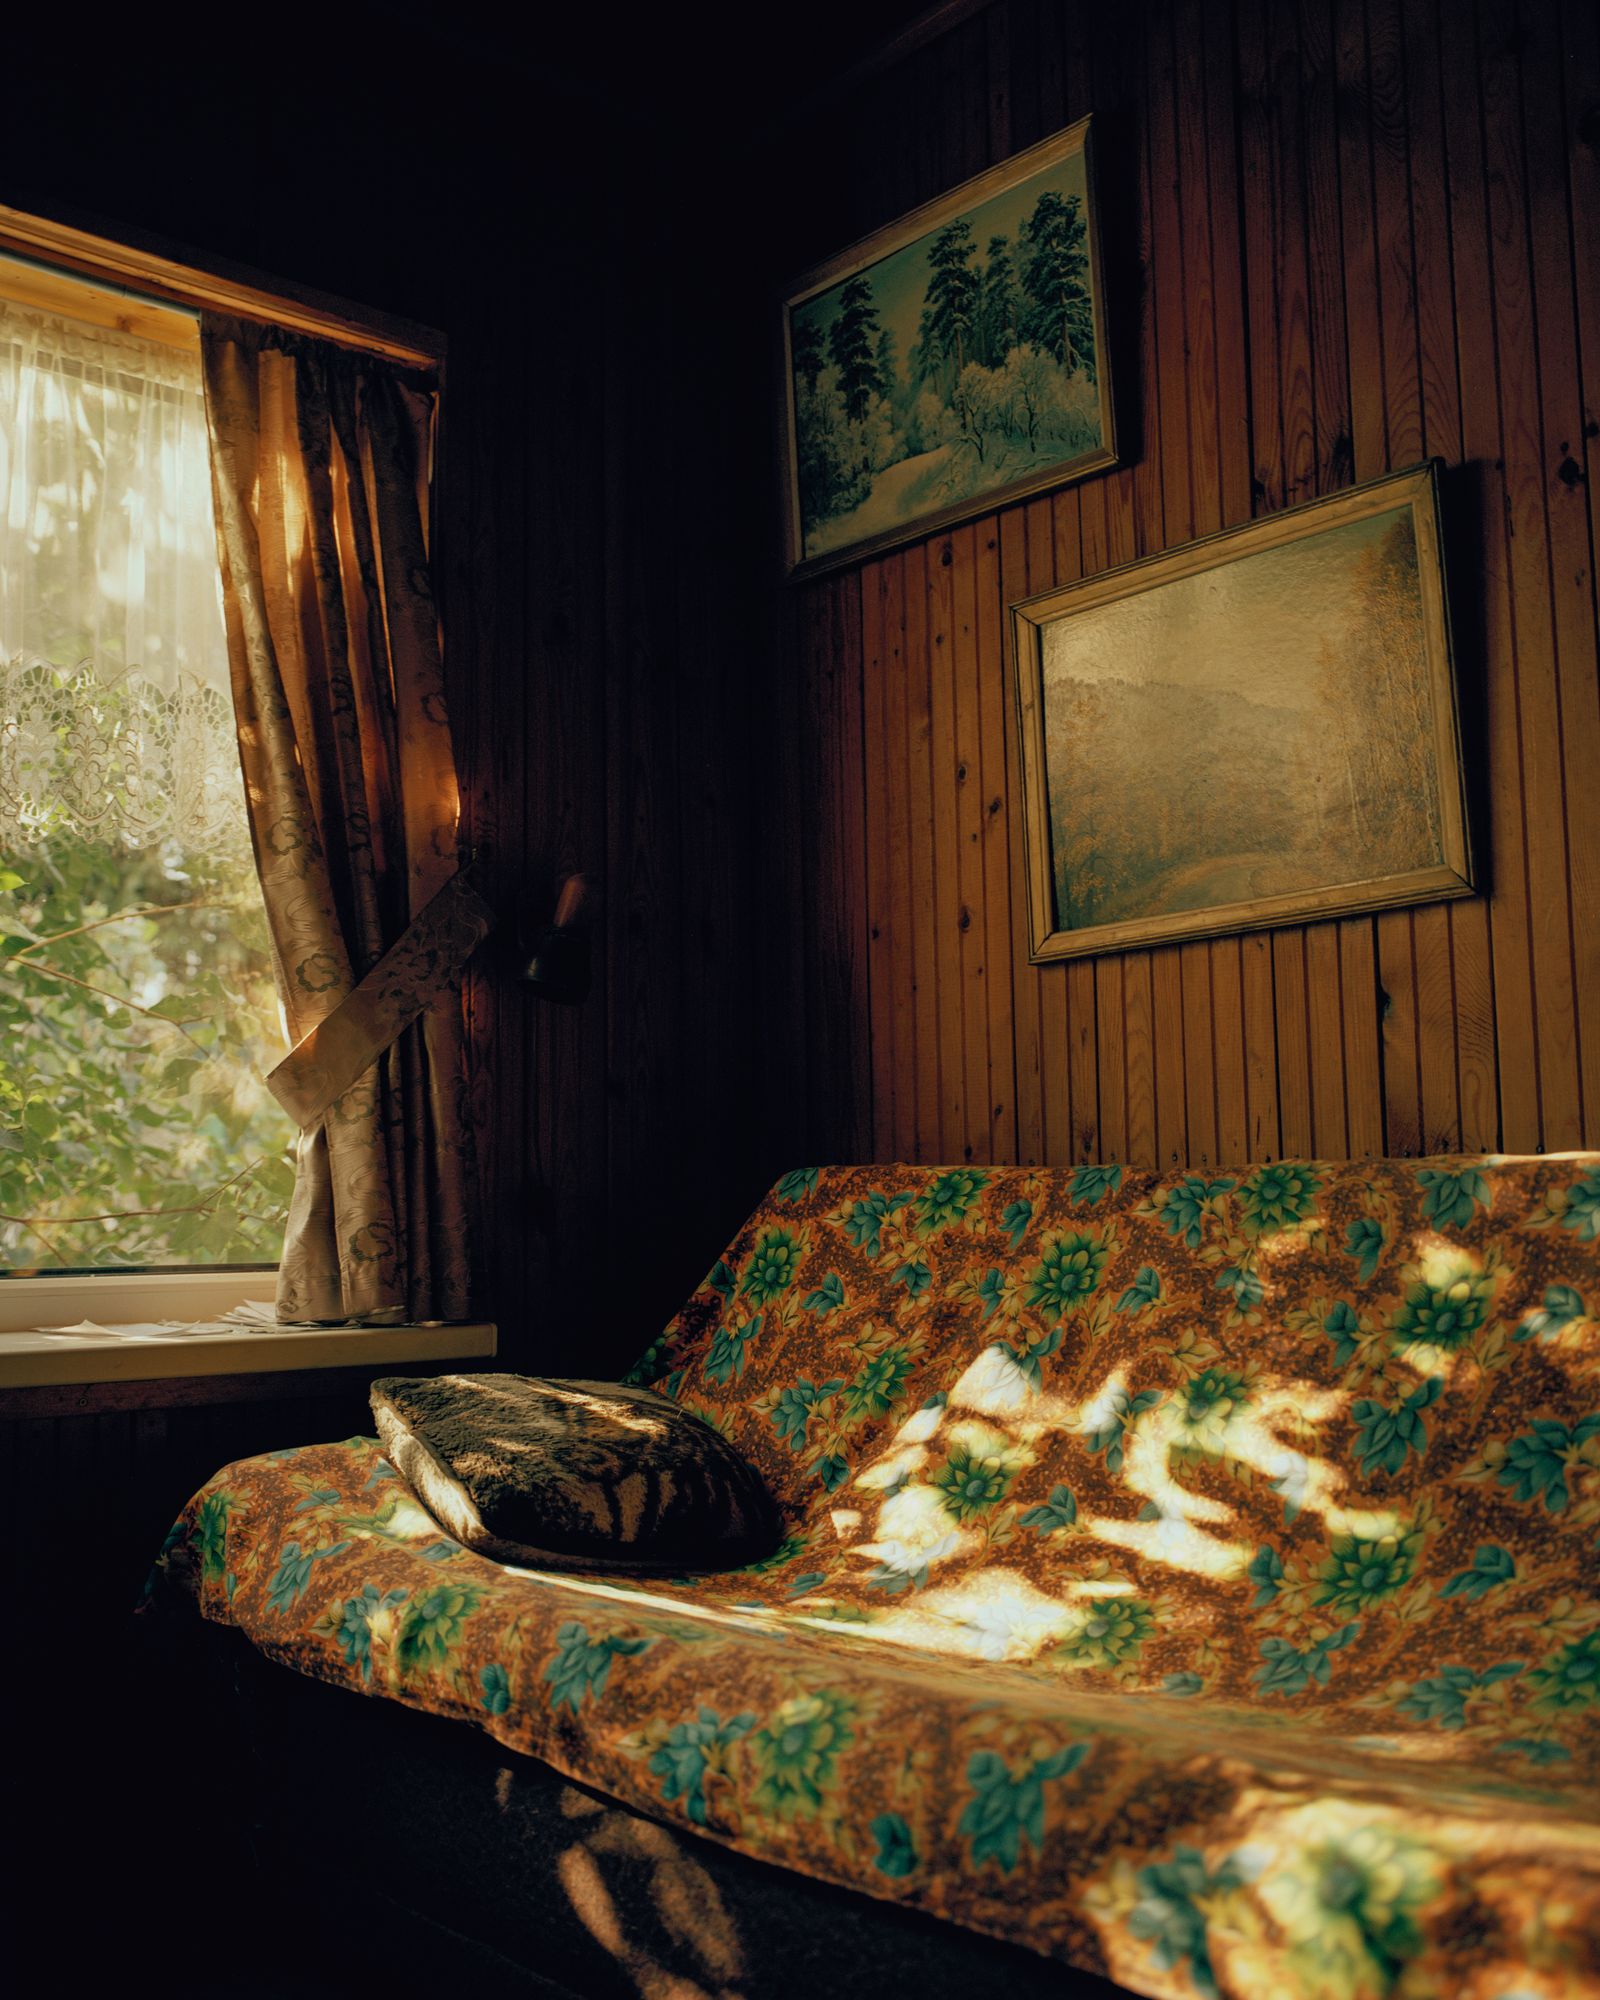 © Varvara Gorbunova - Image from the Untold Stories of Russian Summer photography project